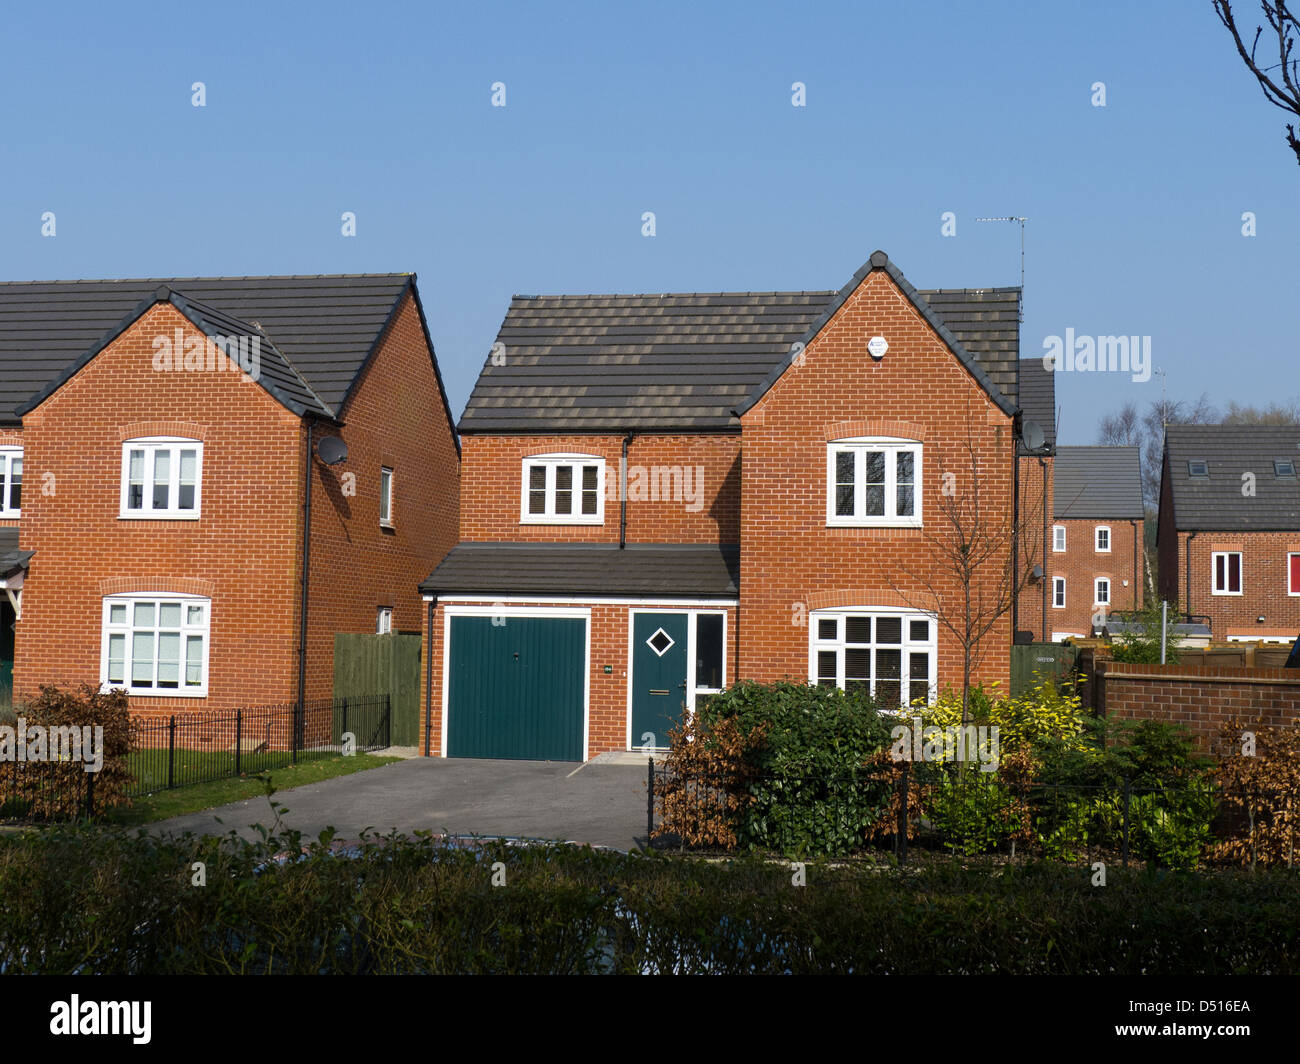 Detached new-build house Stock Photo